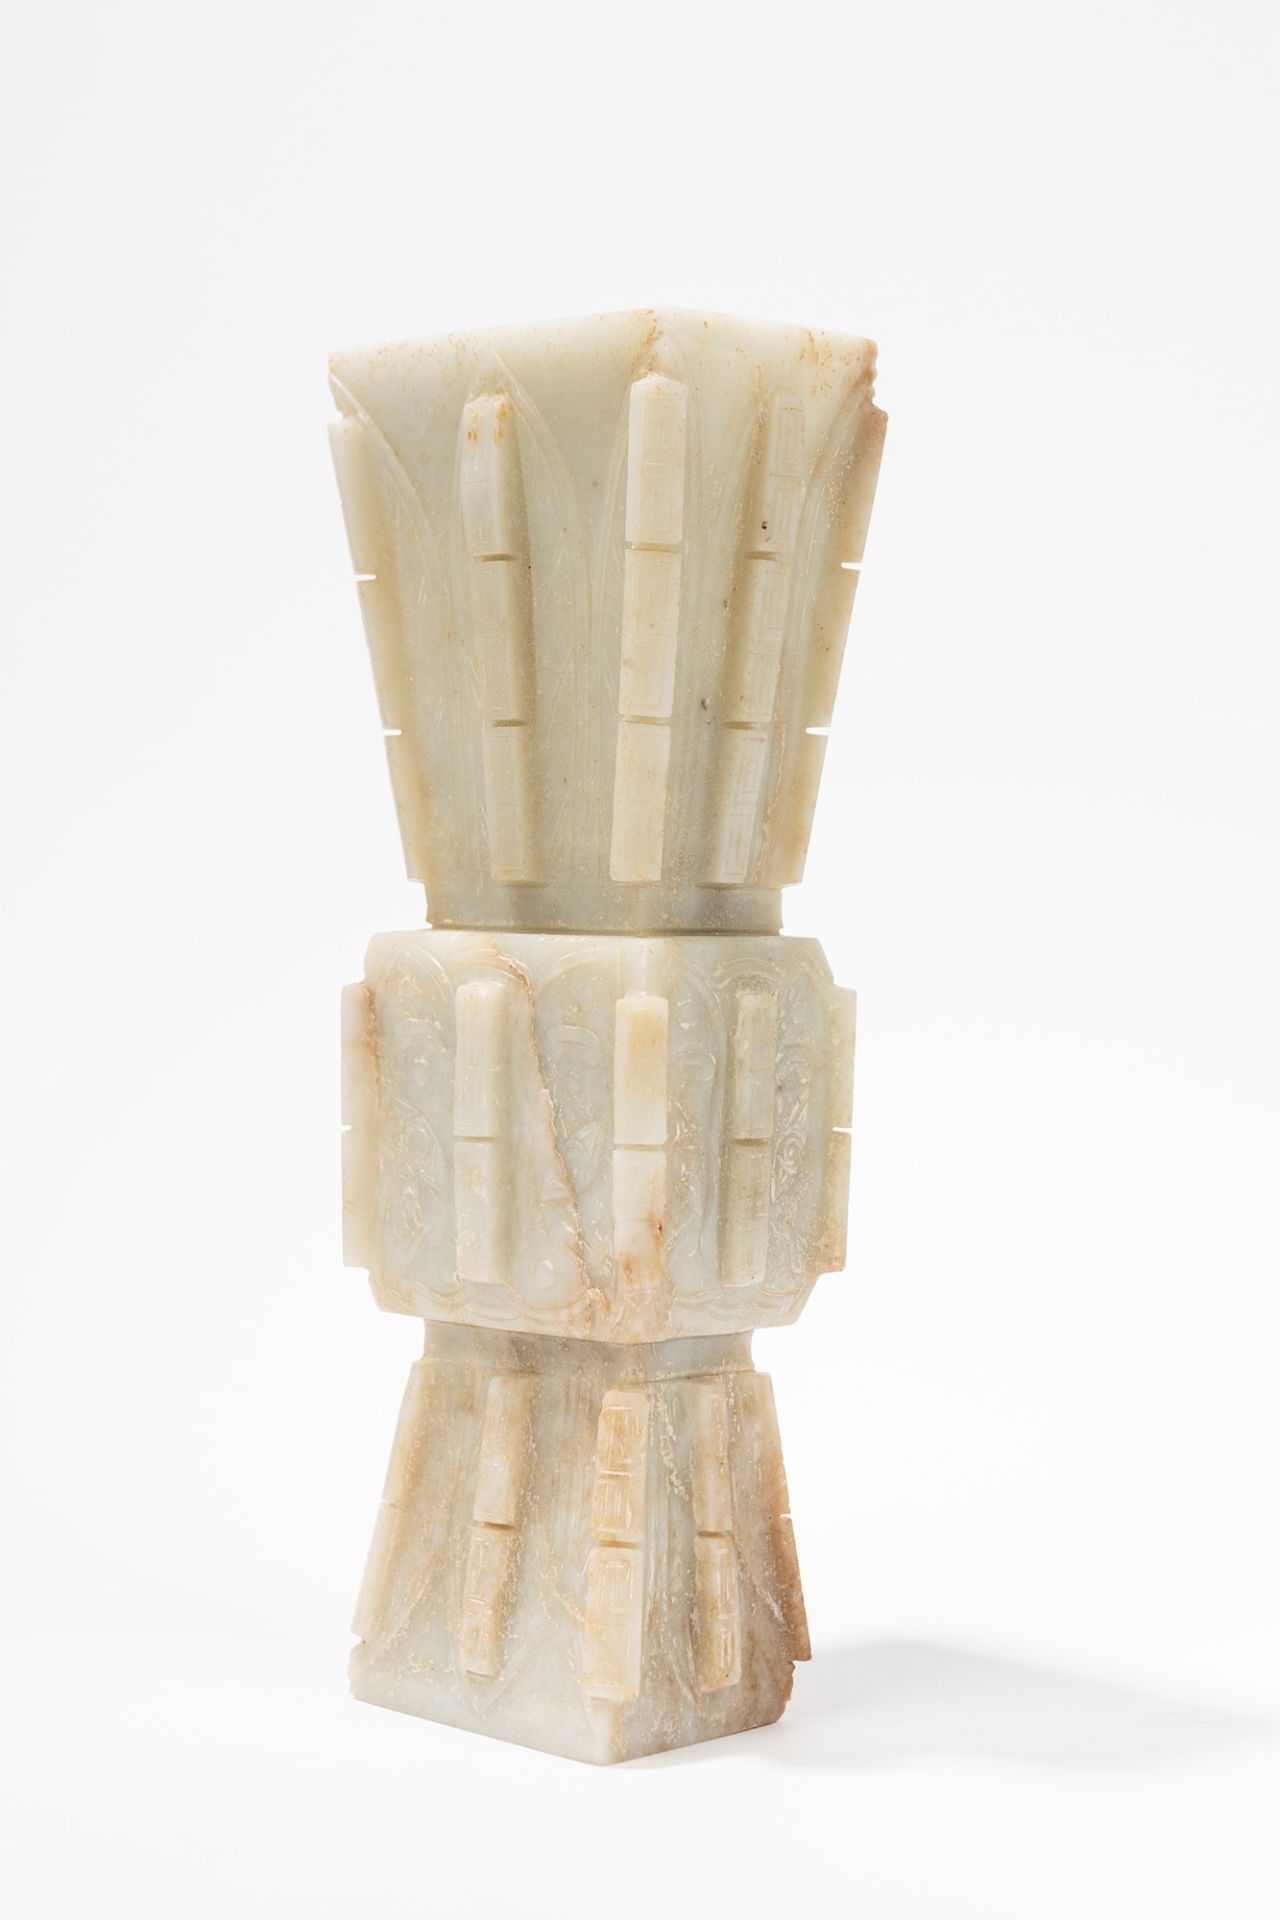 AN ARCHAISTIC MOTTLED WHITE JADE ZUN FORM VASE, China, Ming Dynasty, 17th century - Image 2 of 2